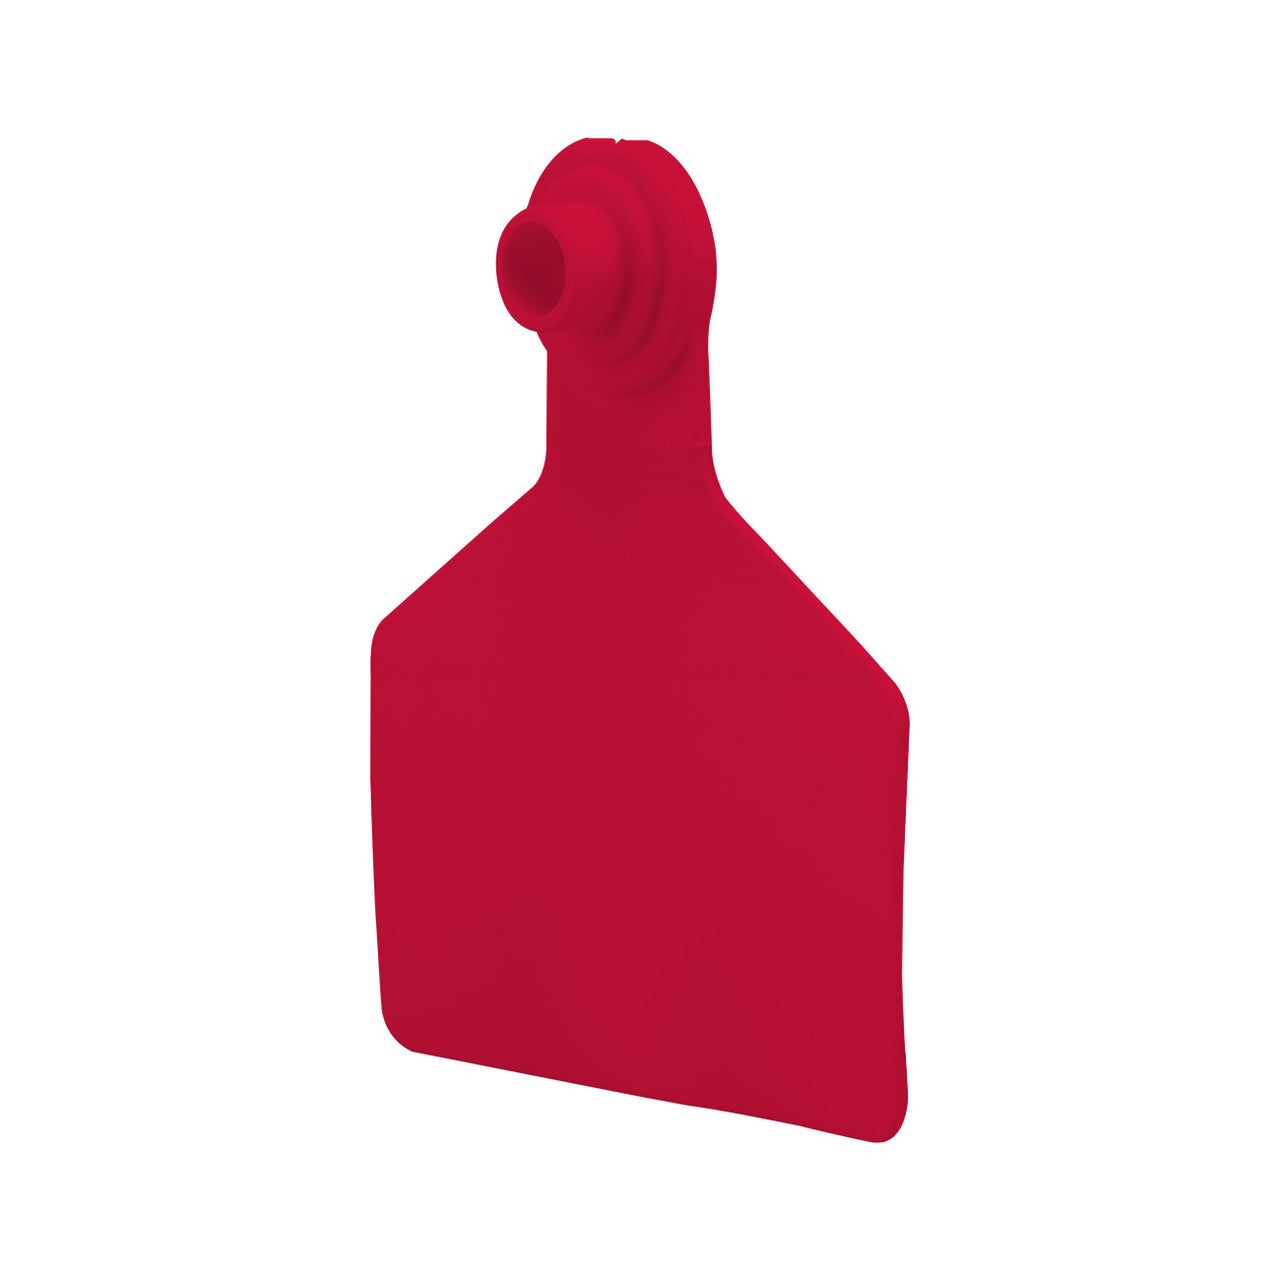 Z Tags Z2 2 Piece Large Blank (Red) 25 Pack - 2 Piece Large Blank Tag Z Tags - Canada